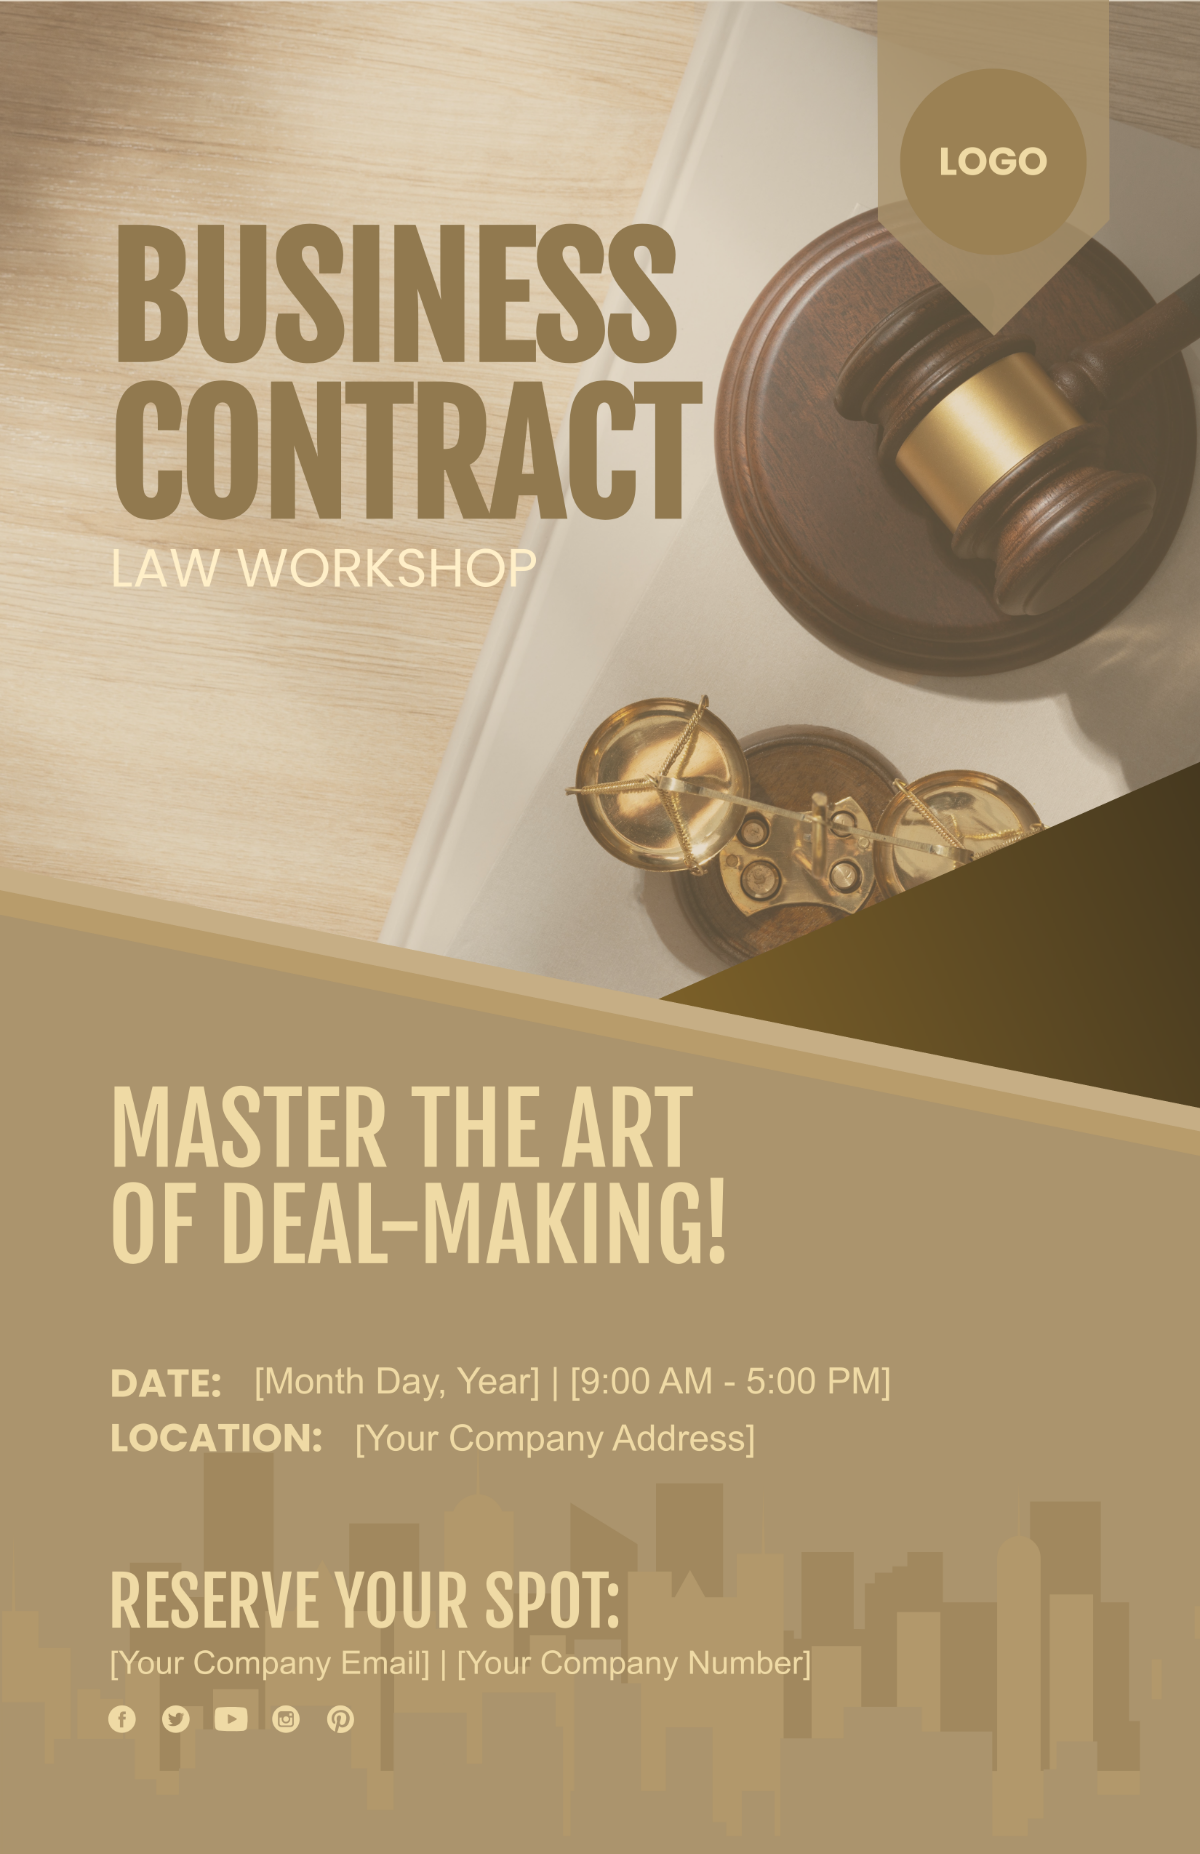 Business Contract Law Workshop Poster